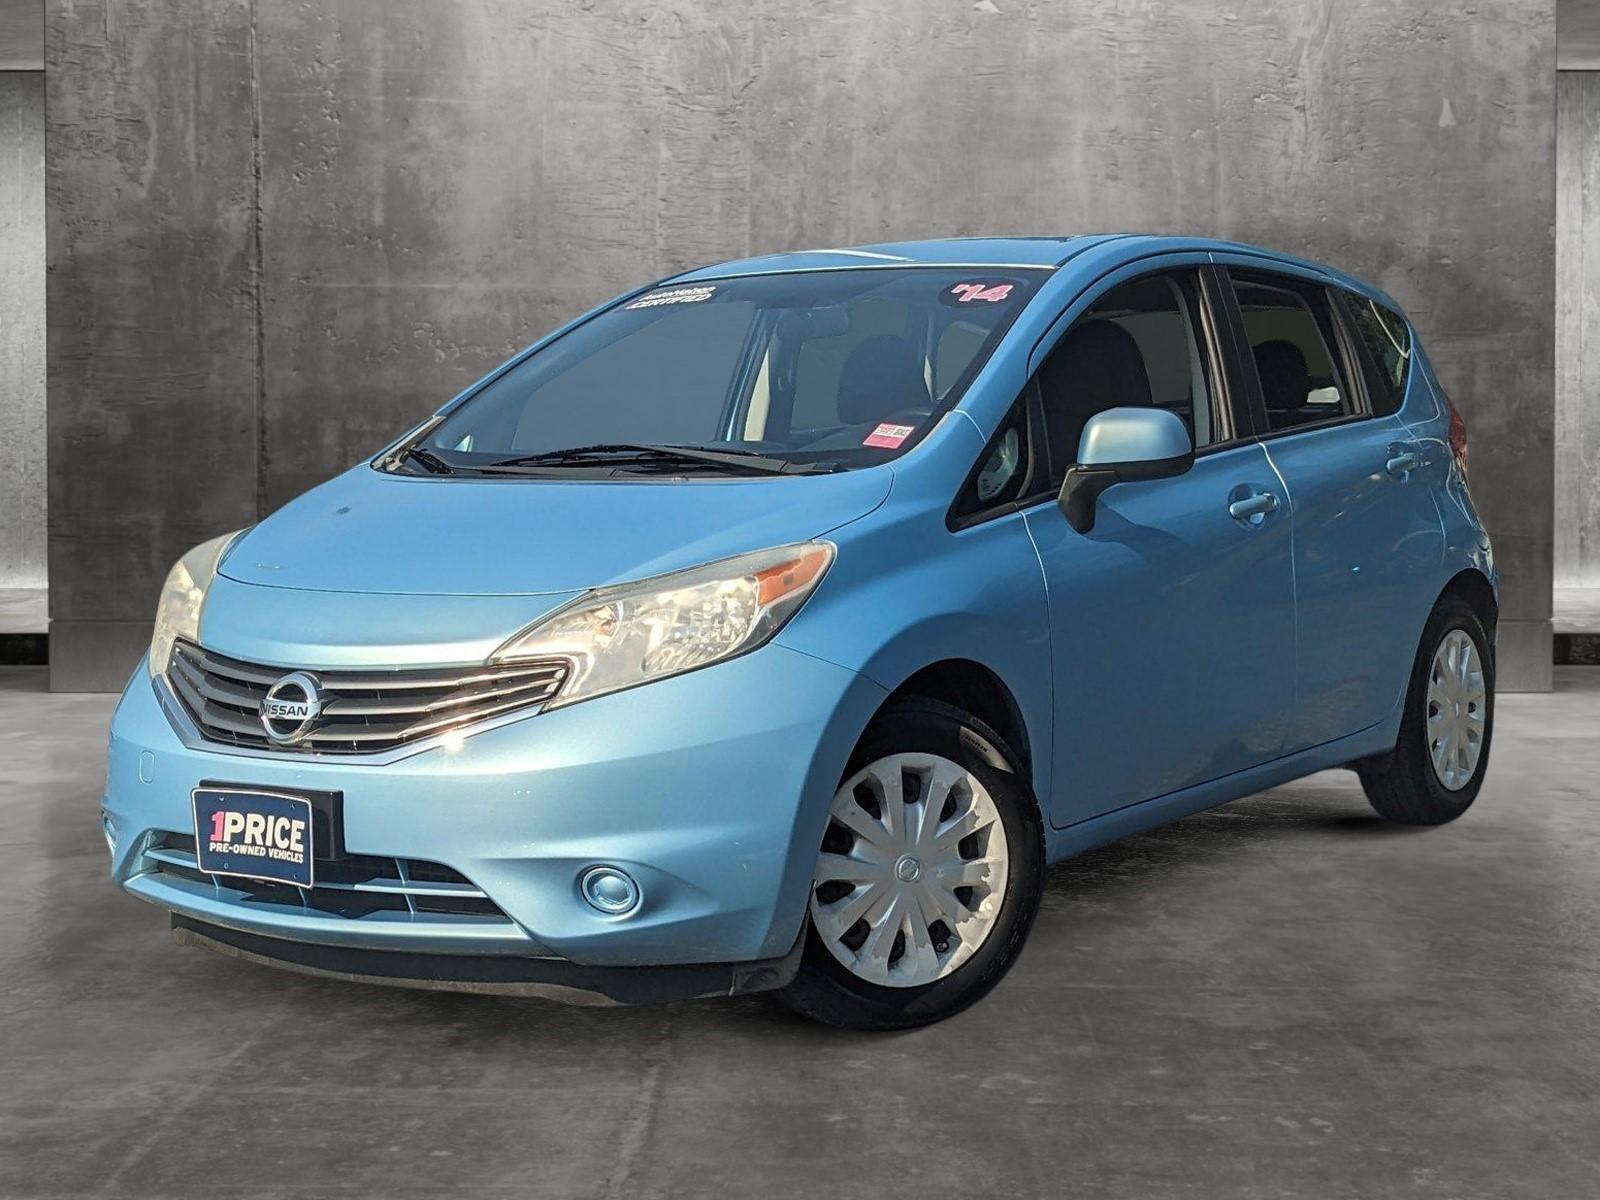 2014 Nissan Versa Note Vehicle Photo in Towson, MD 21204